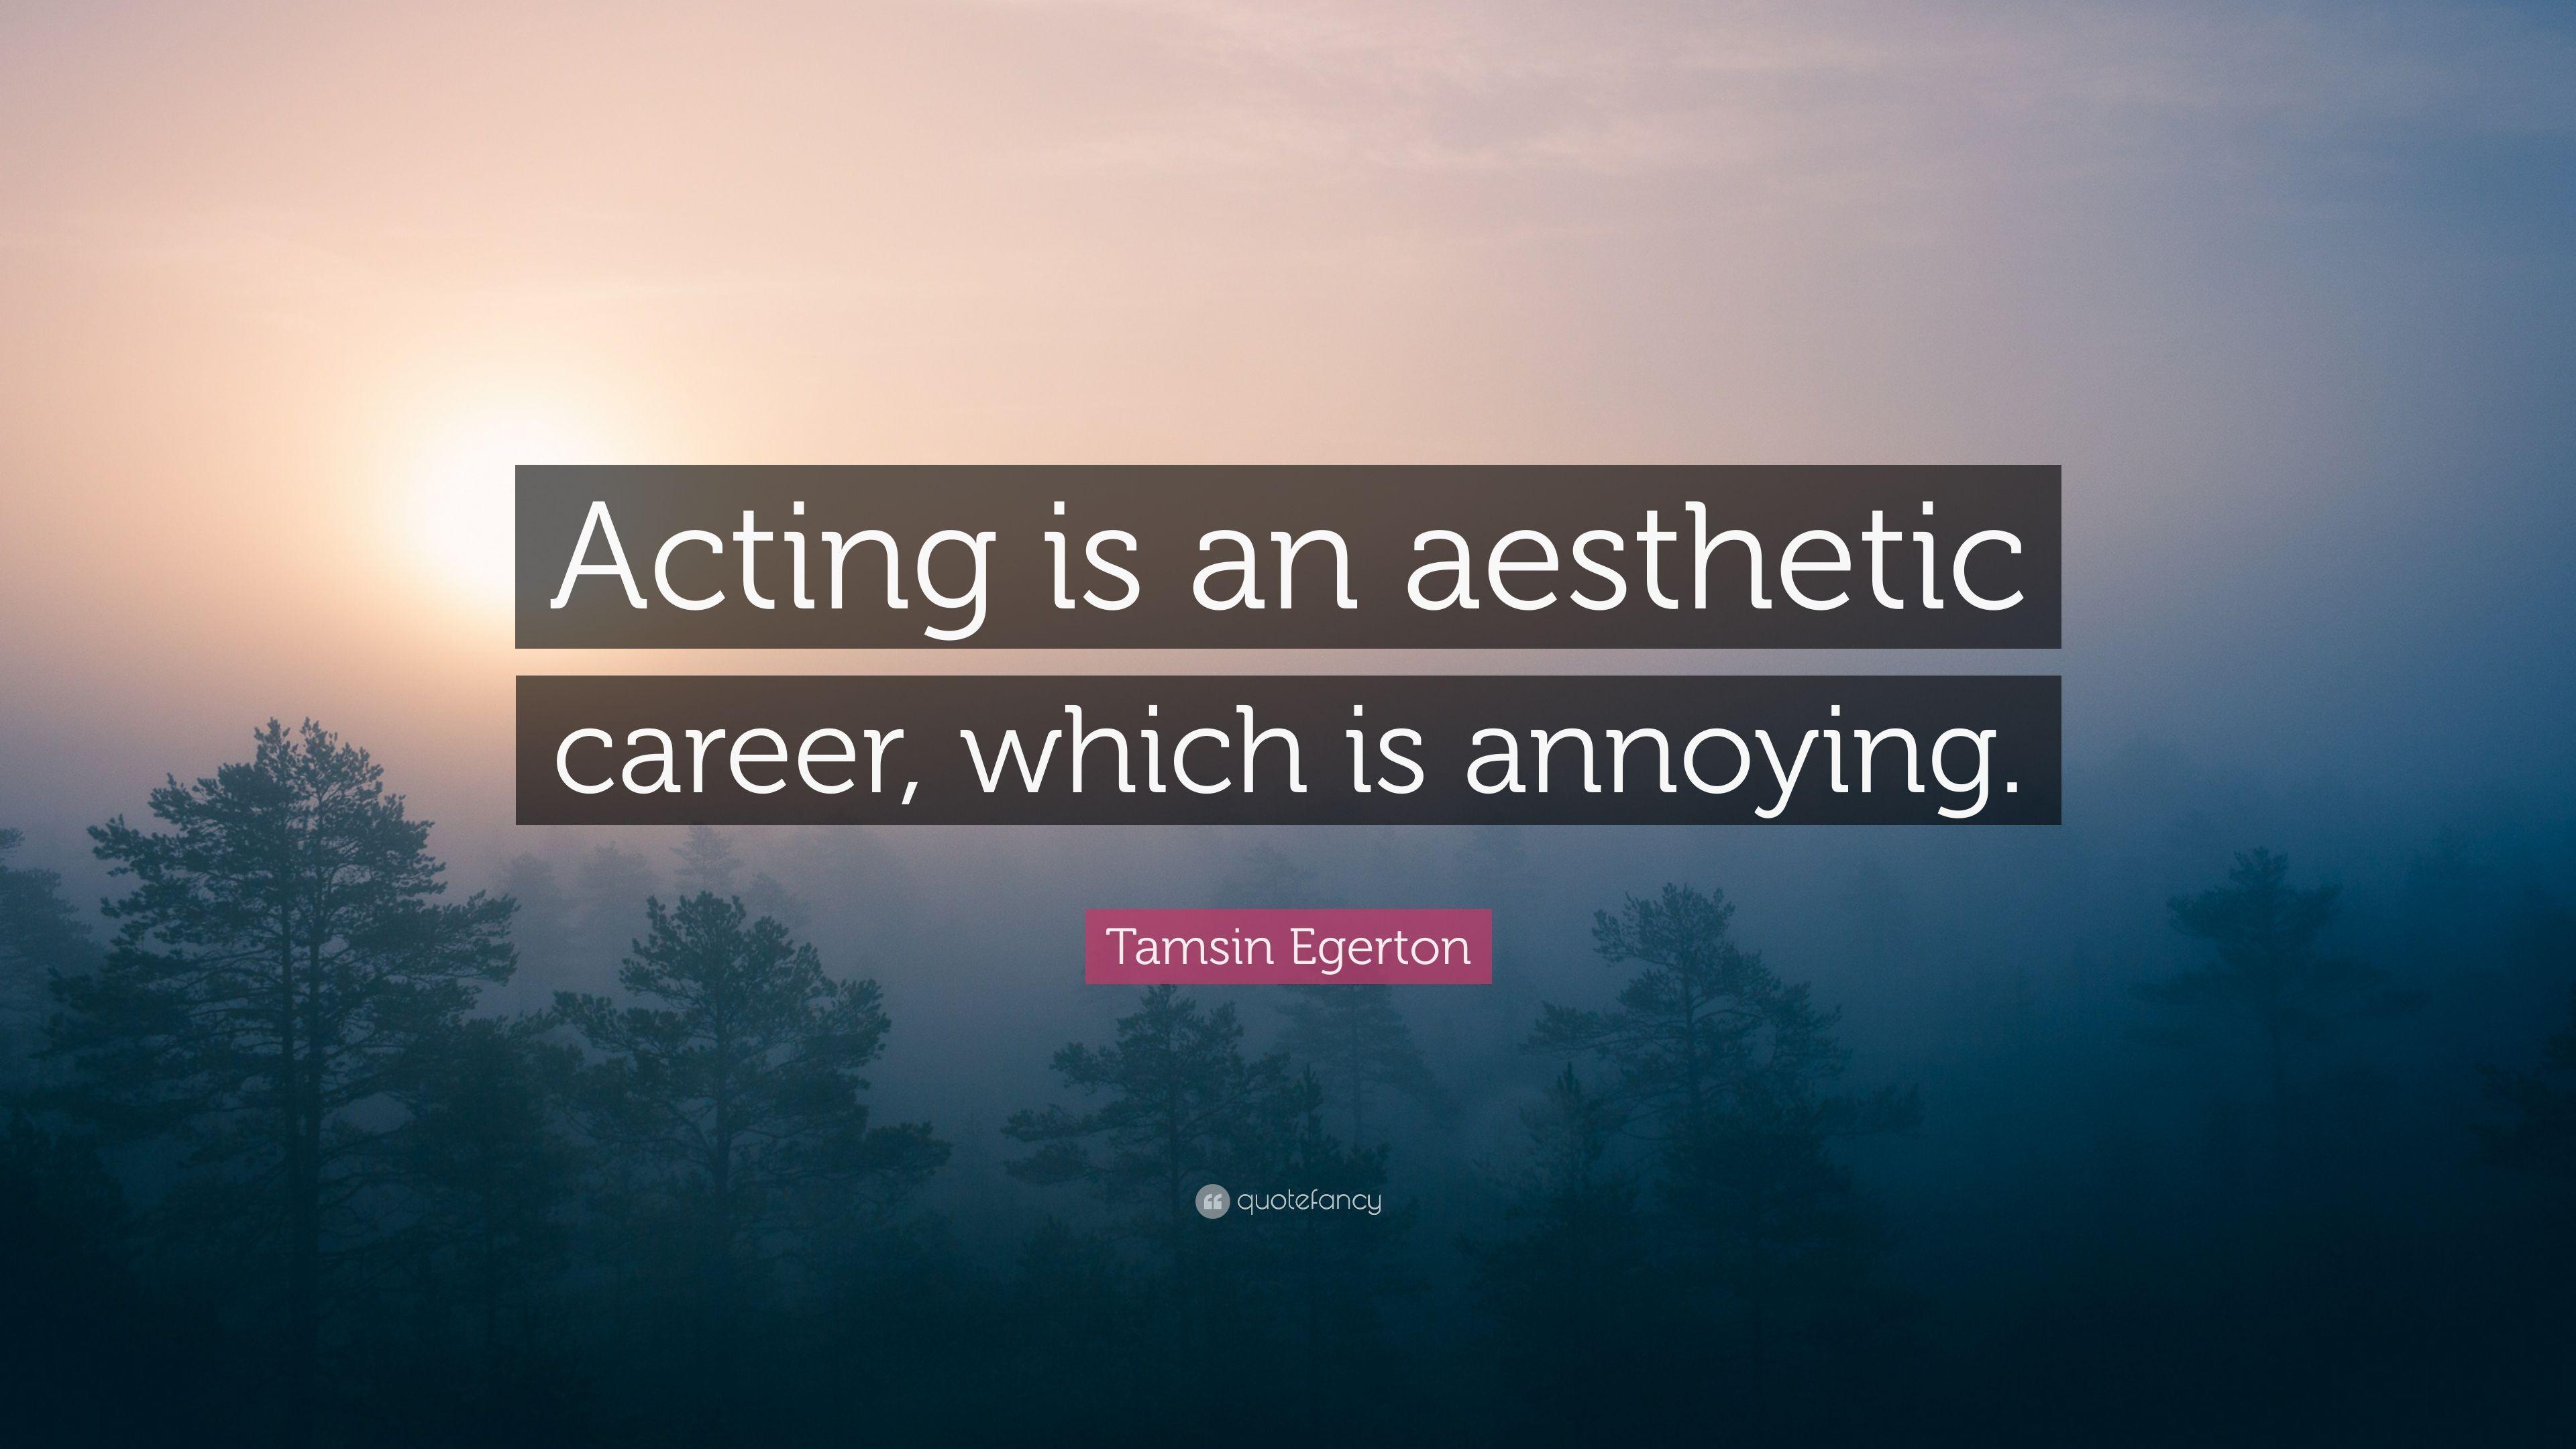 Tamsin Egerton Quote: “Acting is an aesthetic career, which